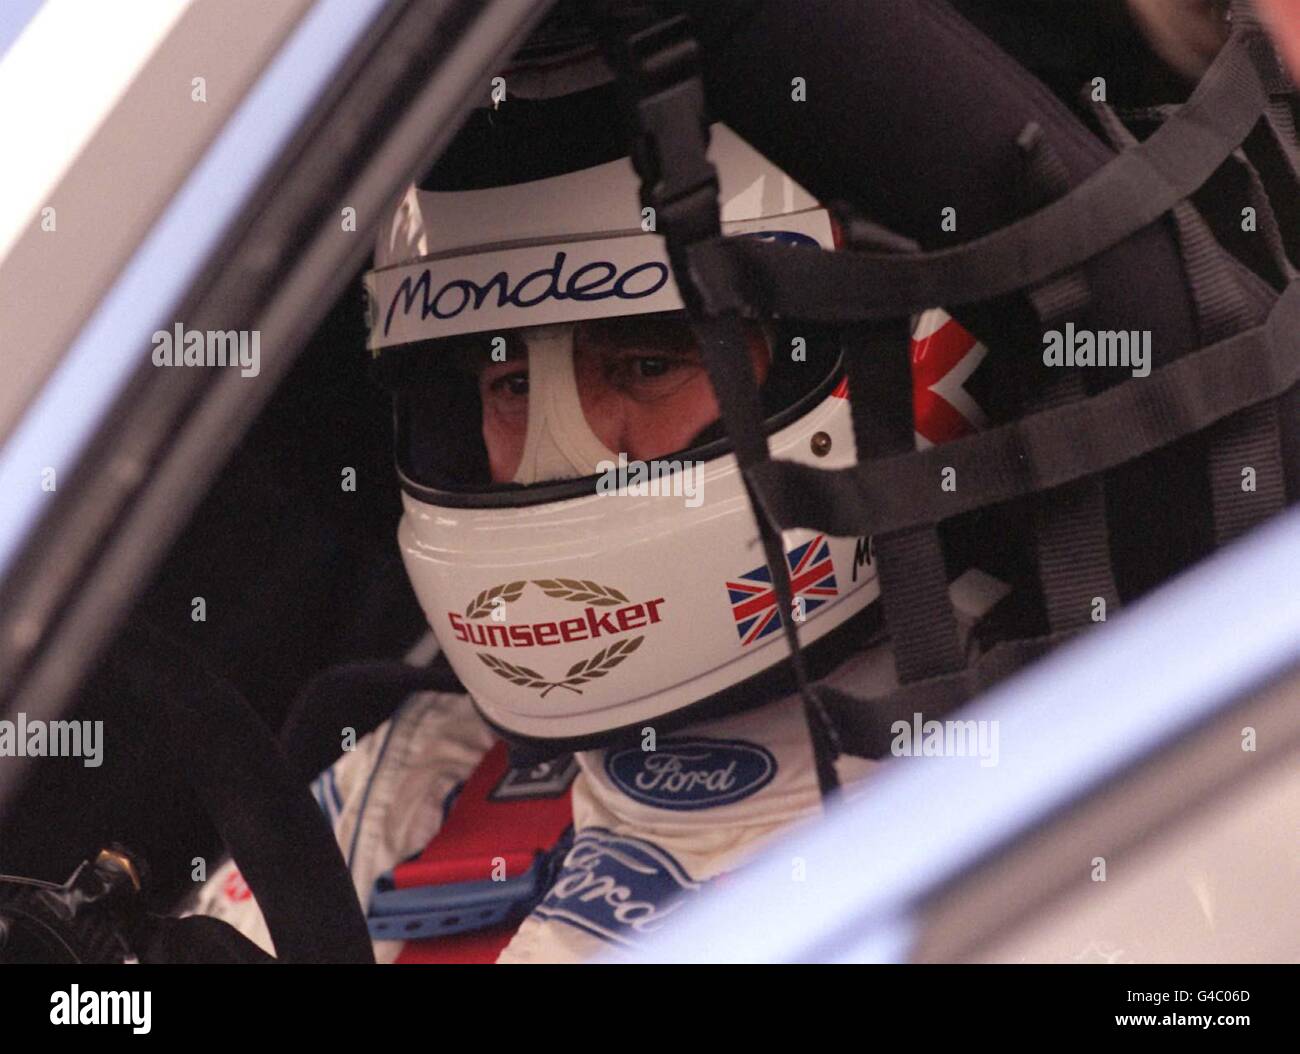 Former Formula One Champion Nigel Mansell found himself back in the driving seat, driving a Ford Mondeo at Donington Park today for rounds 11 & 12 of the Auto Trader RAC British Touring Car Championship. Photo by Derek Cox/PA Stock Photo